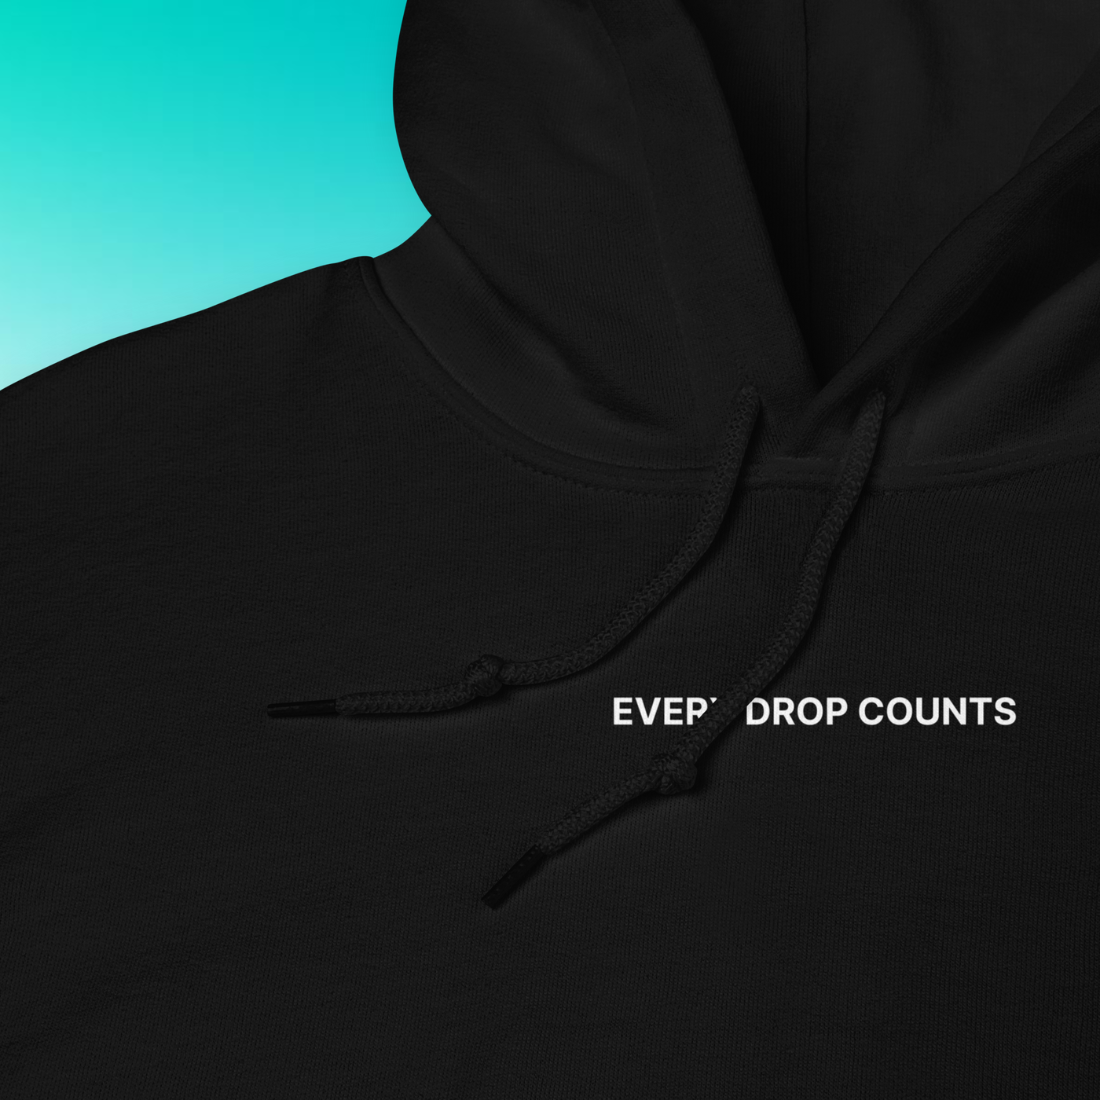 Every Drop Counts Hoodie | V1